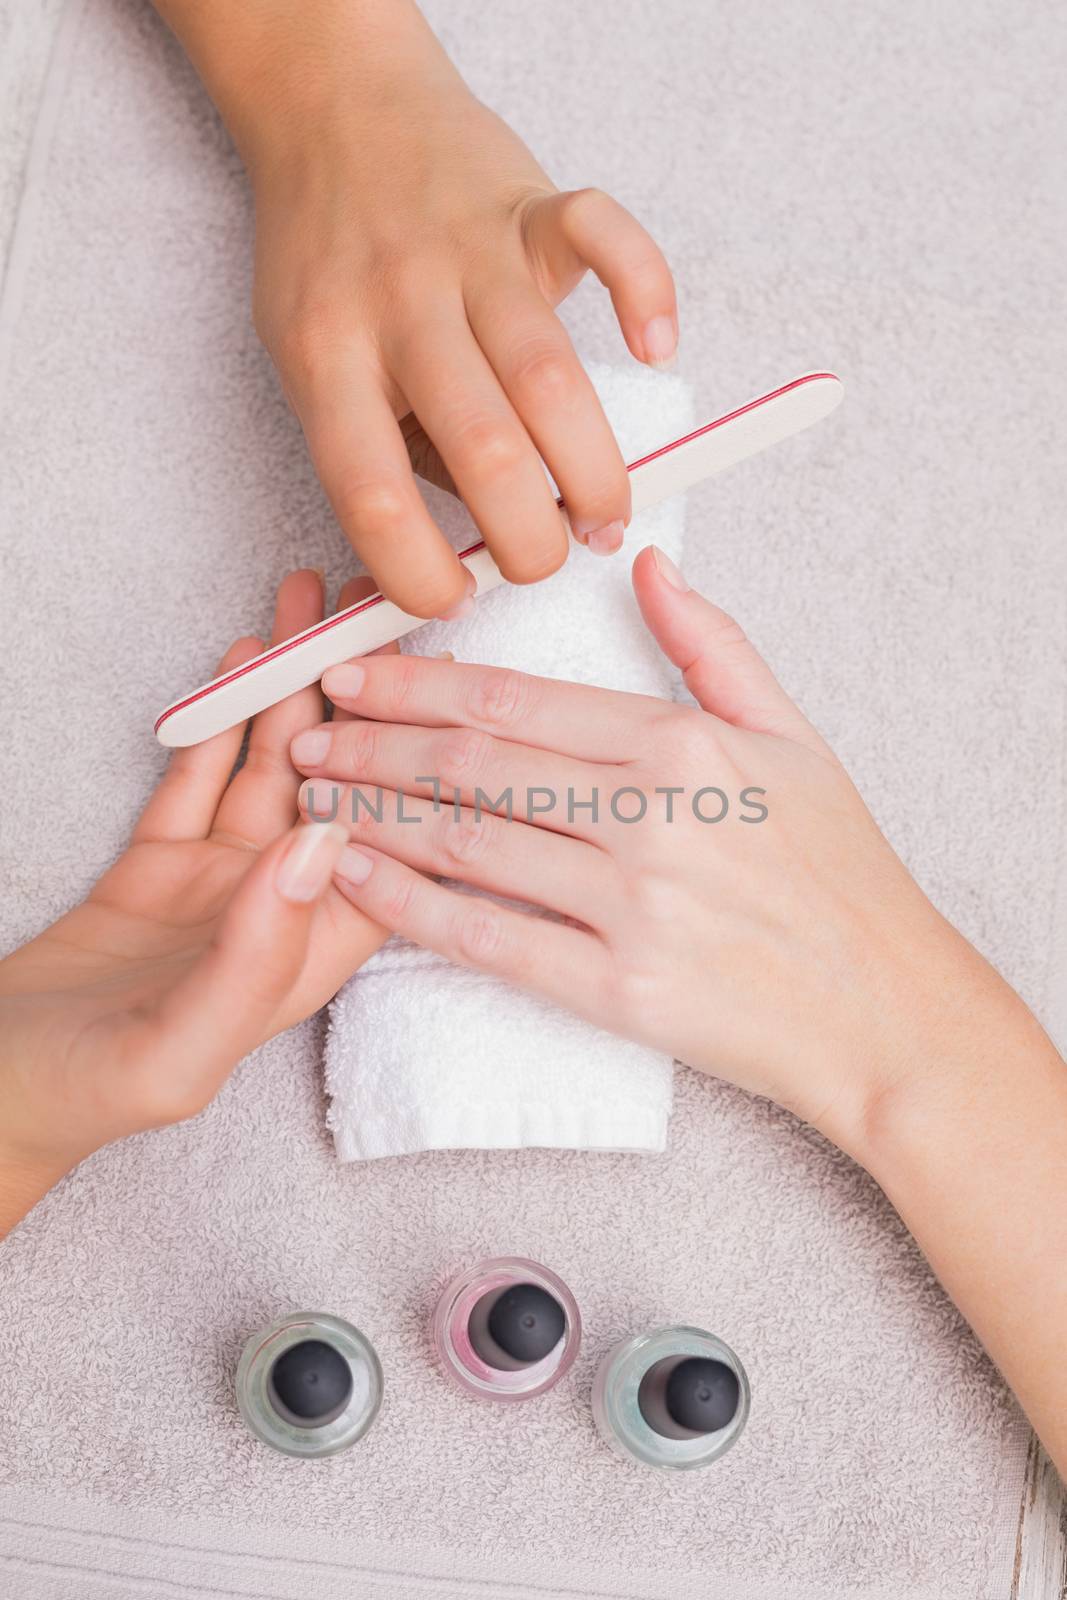 Nail technician giving customer a manicure at the beauty salon